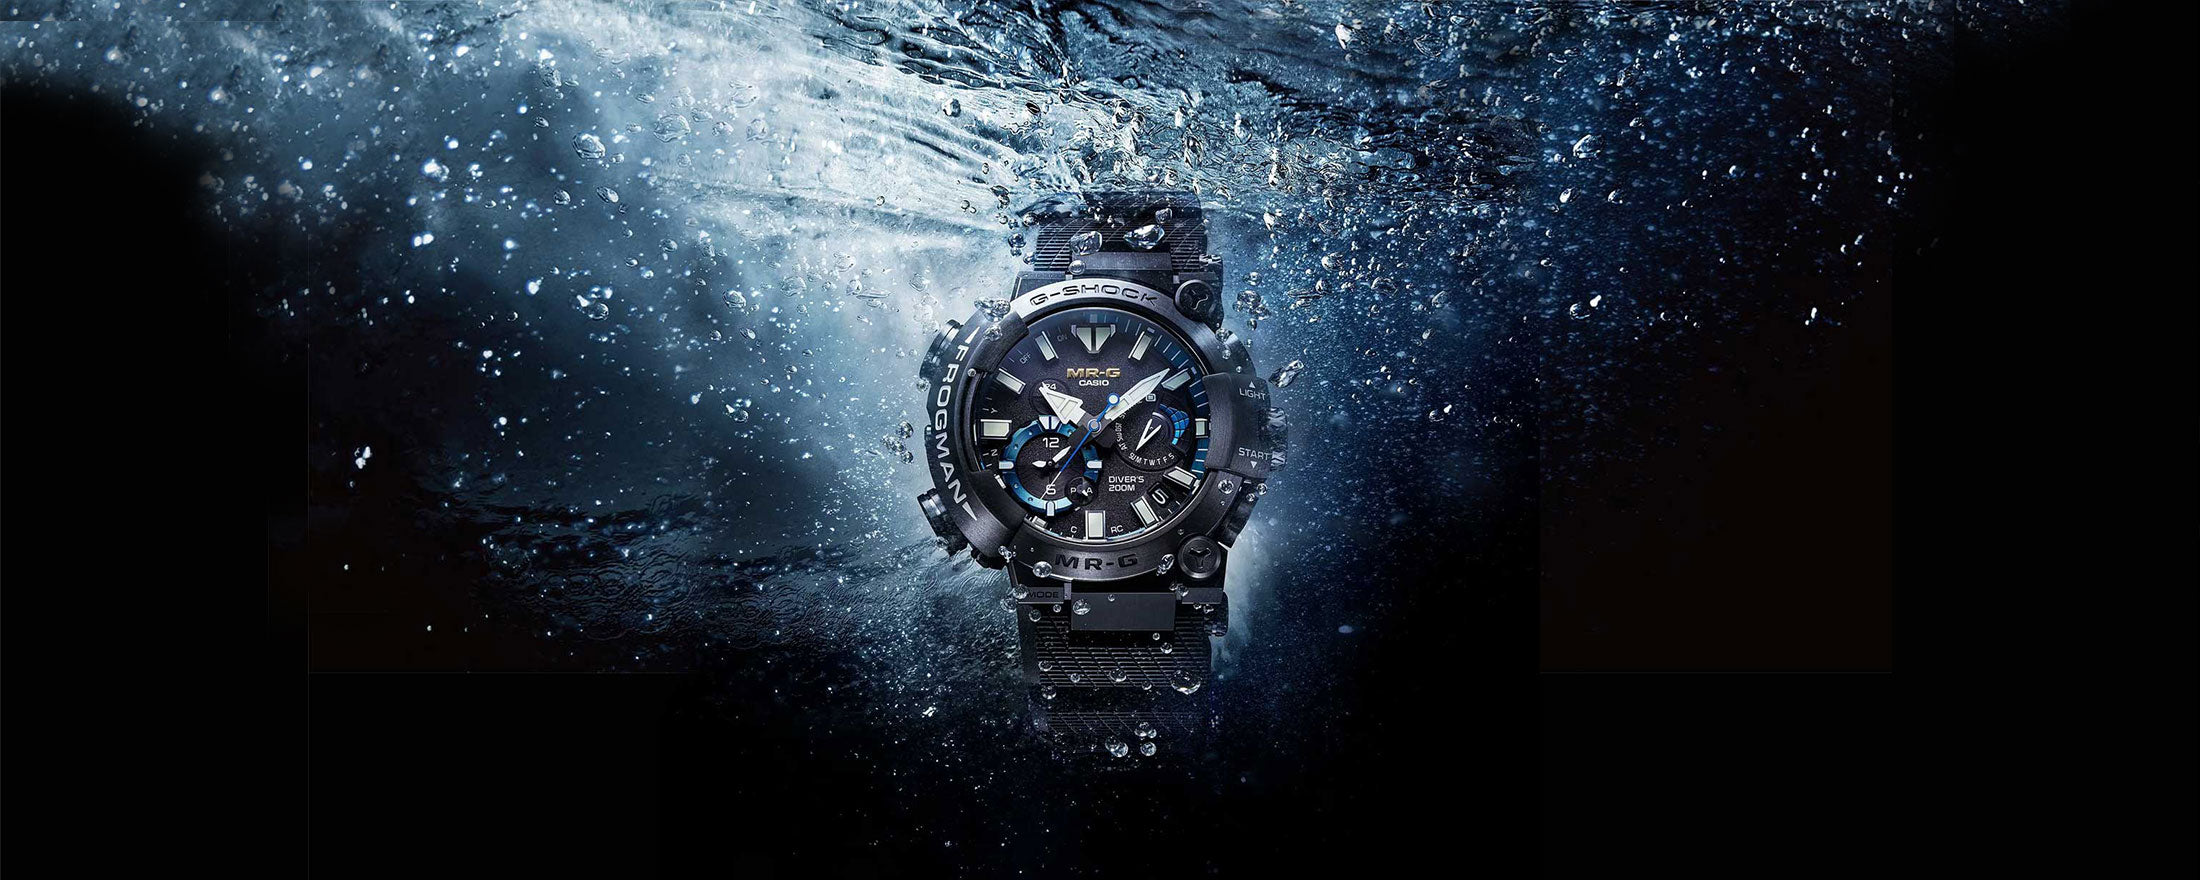 Men's Pro Dive Watch, FROGMAN Watches Collection, G-SHOCK